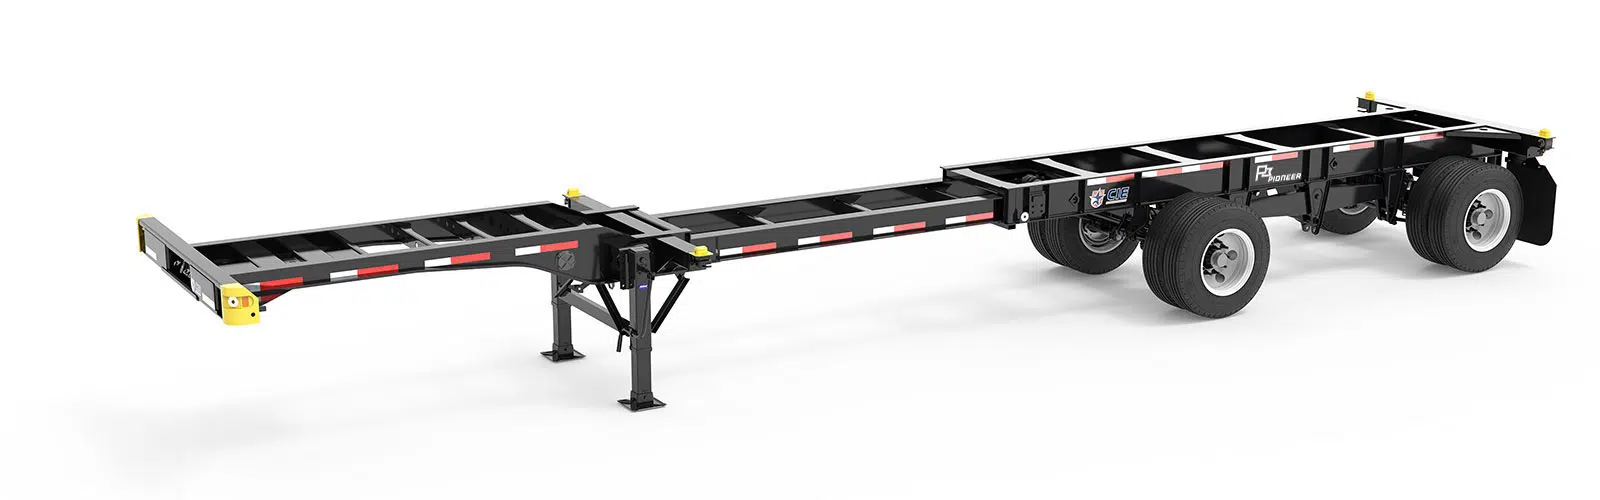 Widespread Tandem Combo Chassis for Lease in Huntsville AL